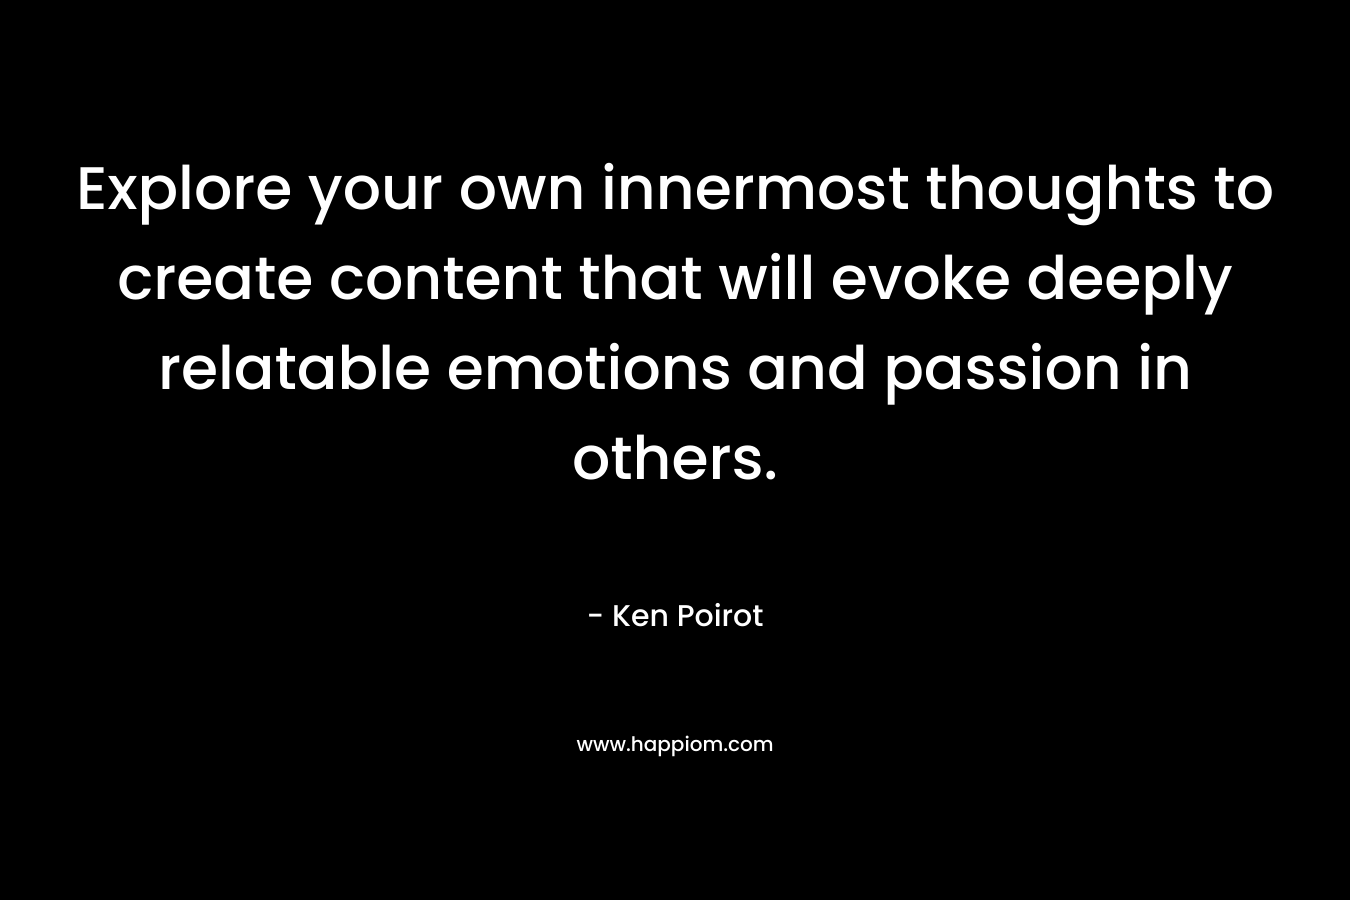 Explore your own innermost thoughts to create content that will evoke deeply relatable emotions and passion in others.